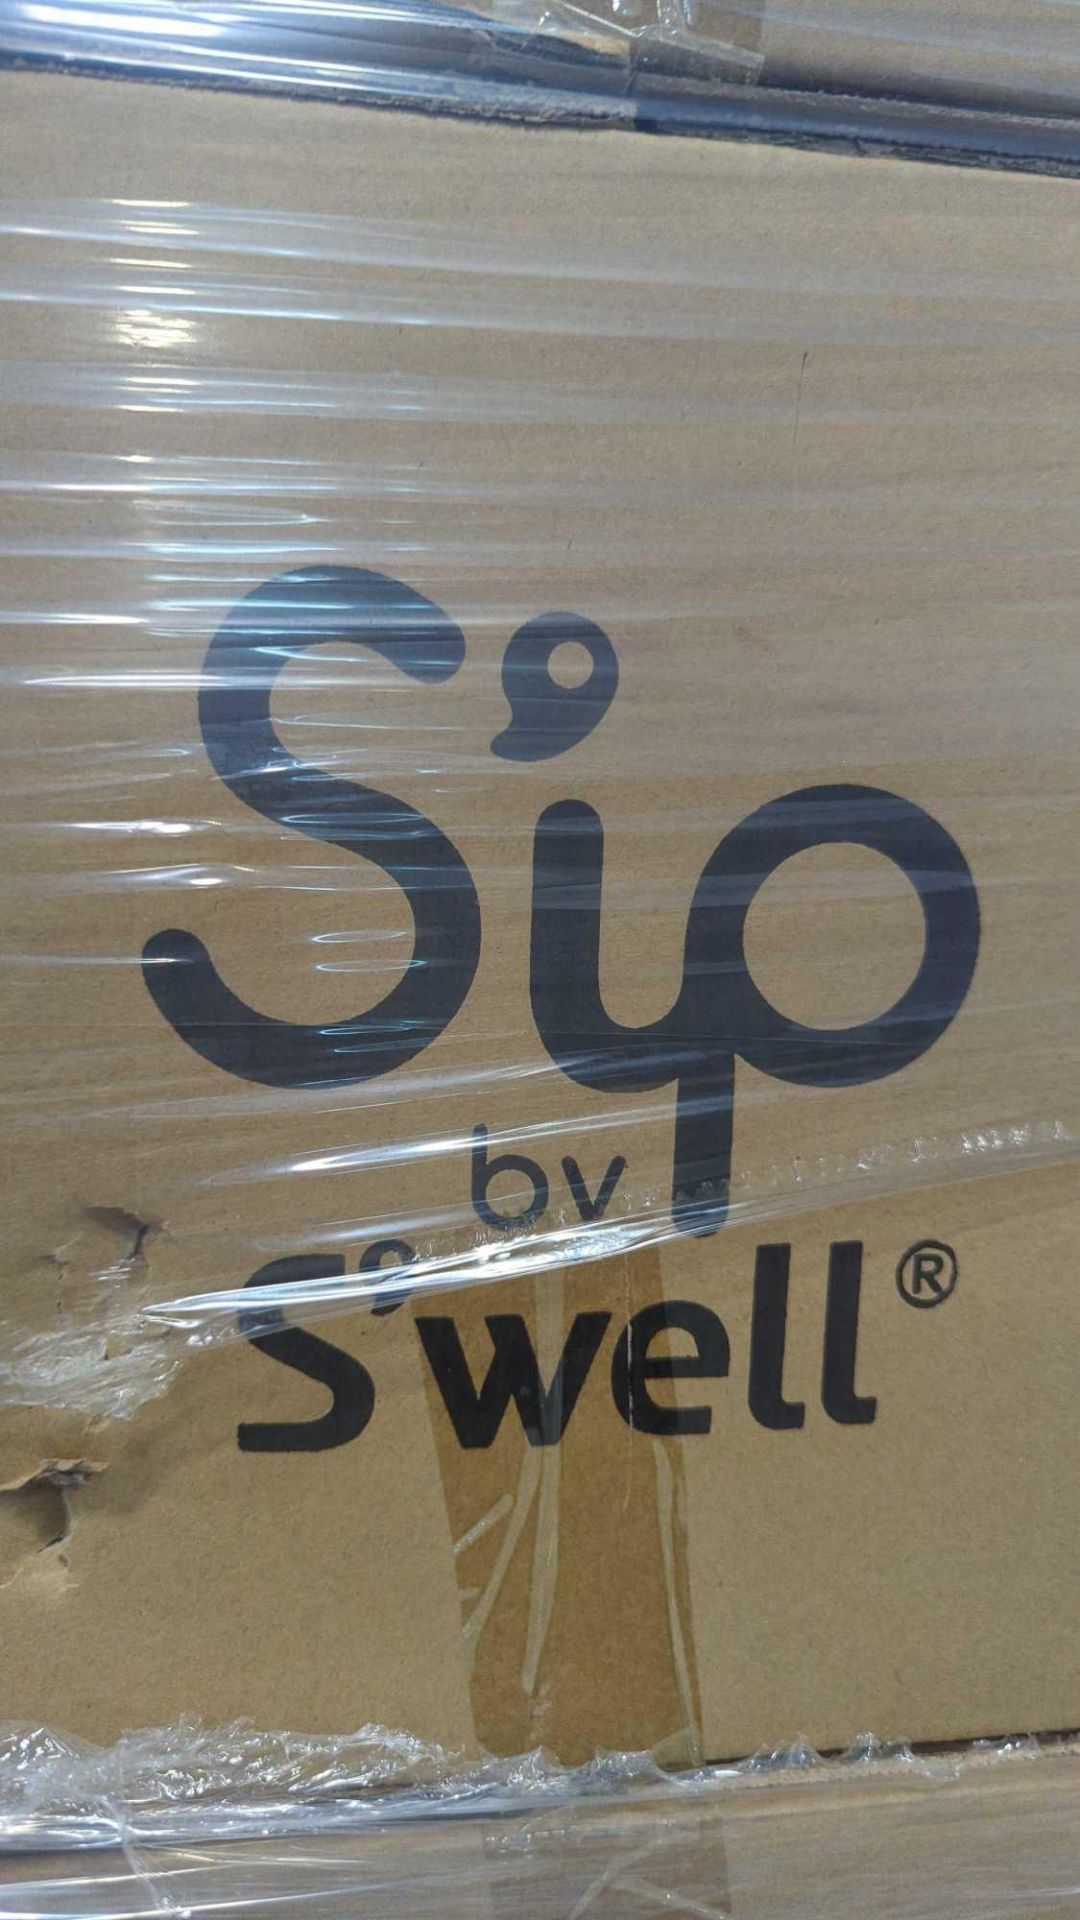 Pallet- Sip by swell water bottles, Halo/Marriott